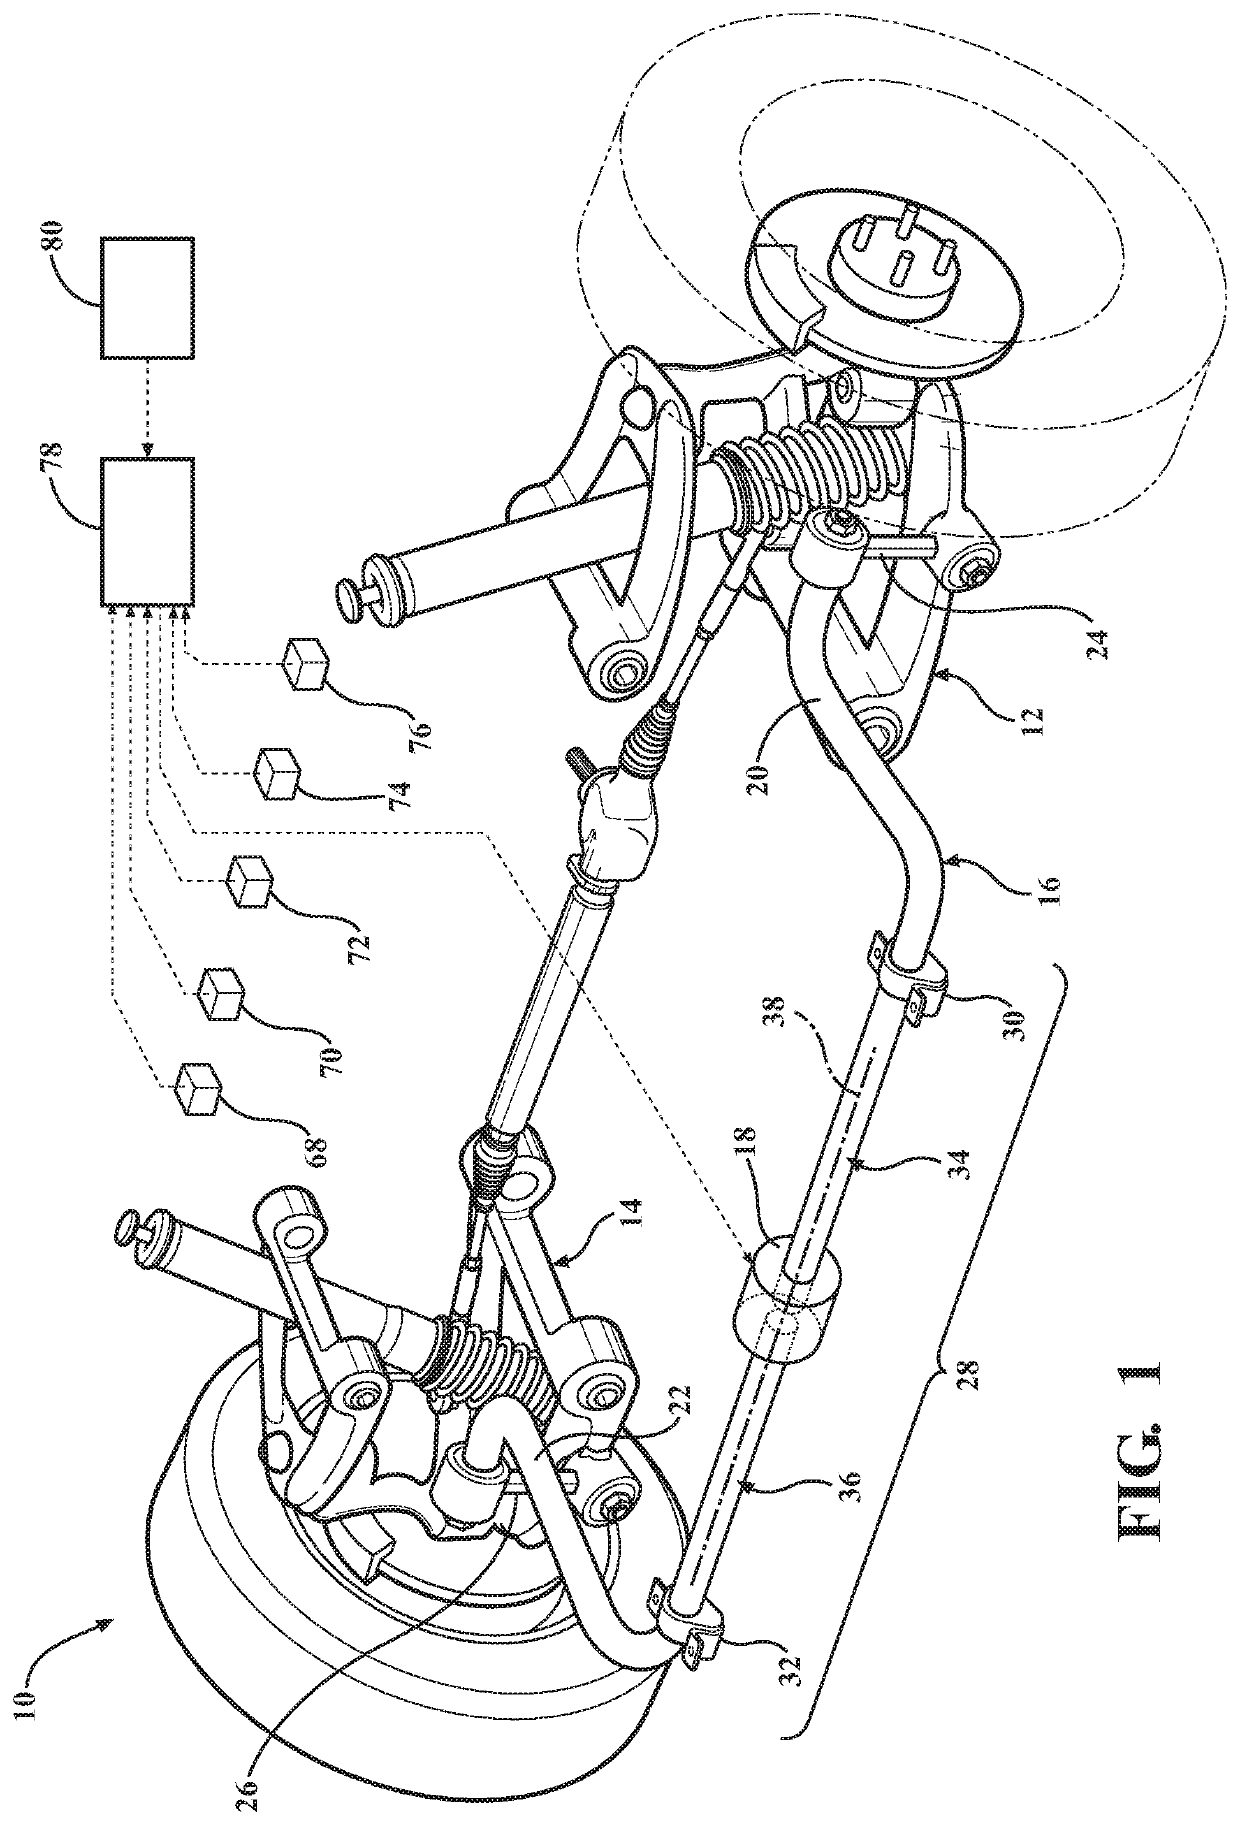 Variable stiffness sway bar for a suspension system of a motor vehicle